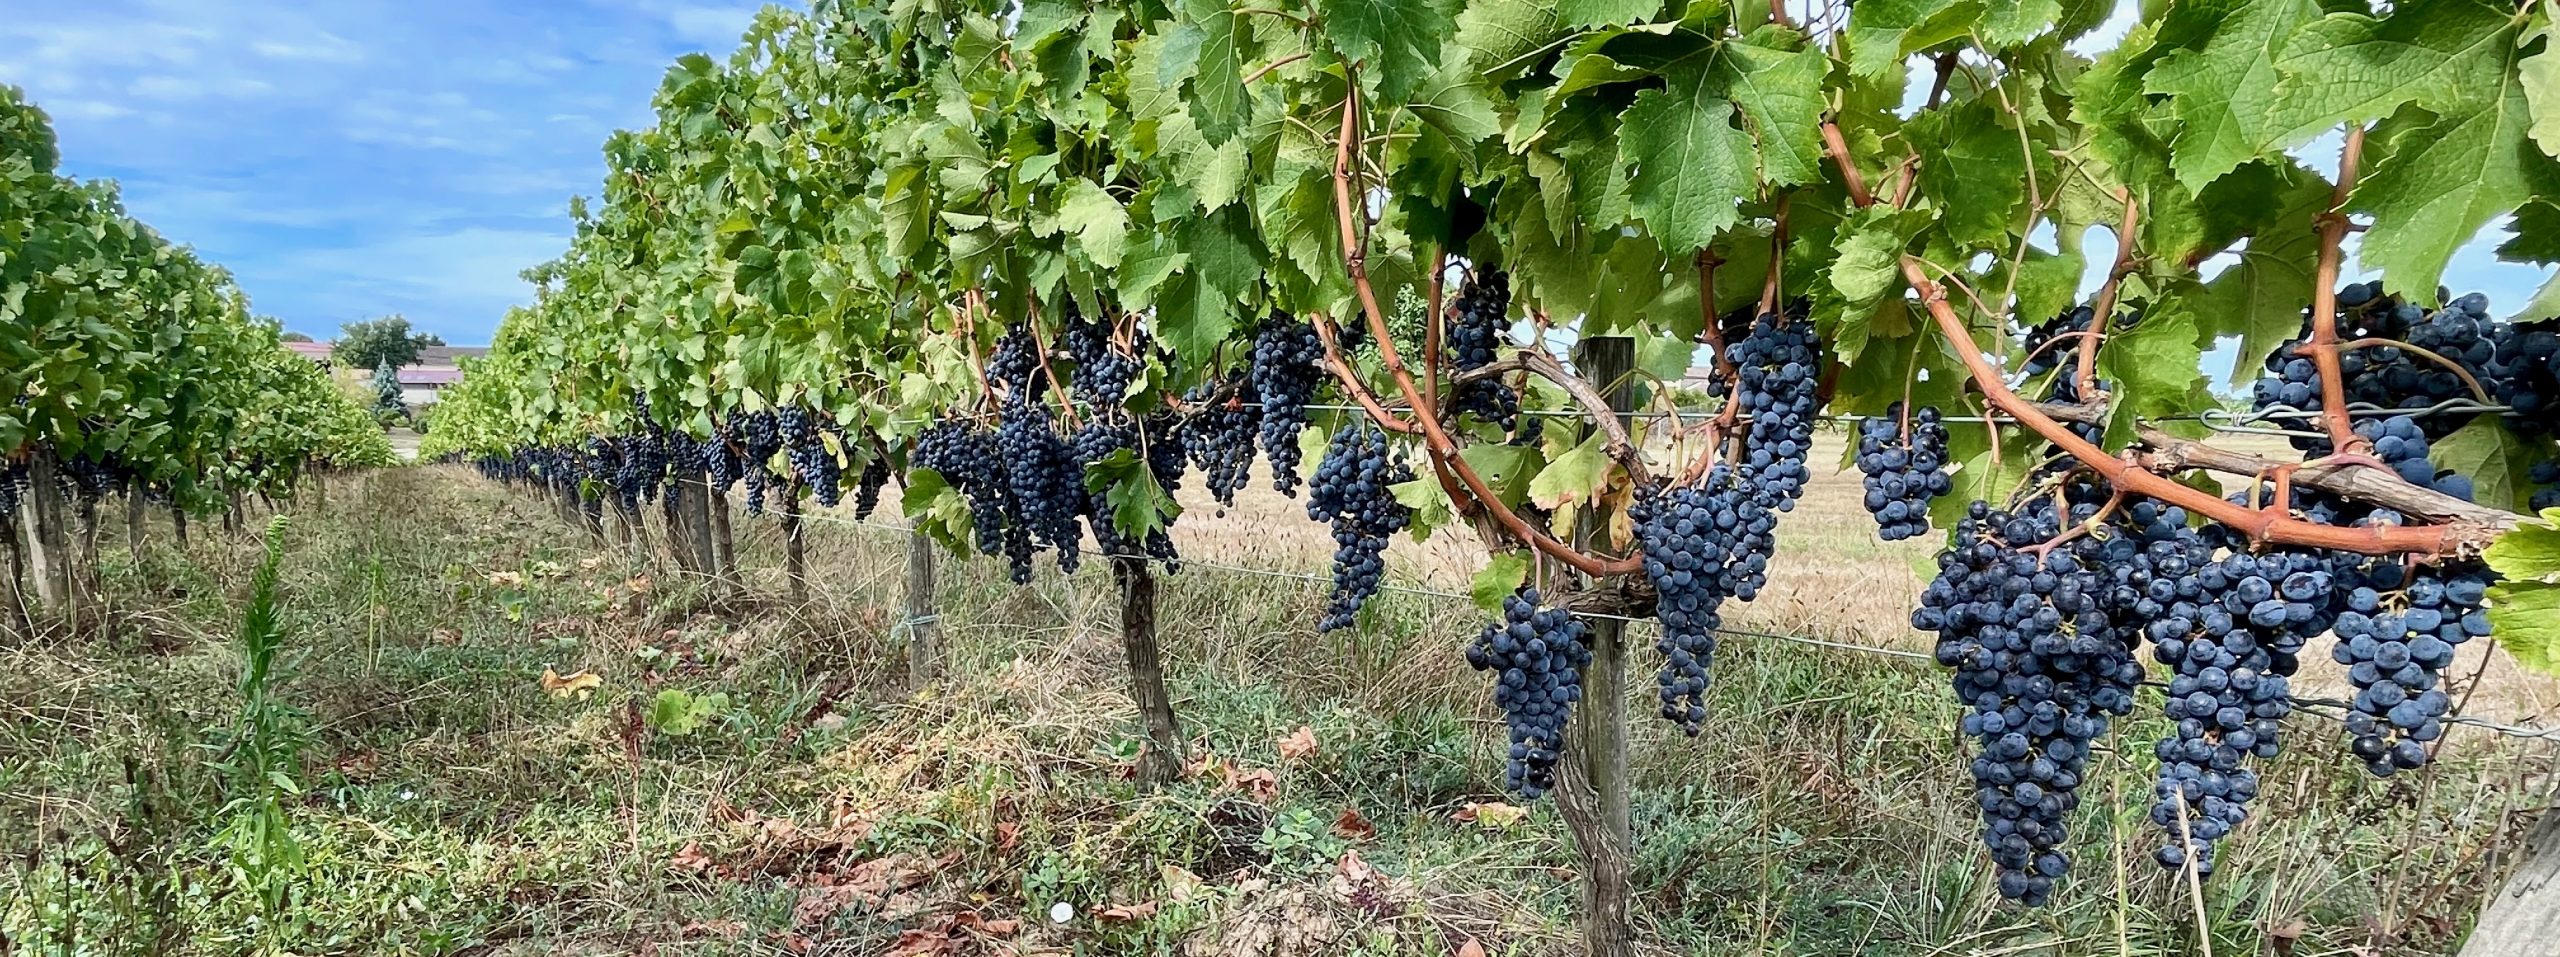 The Merlot fruit at Paradise Rescued 2022 - two weeks prior to harvest.